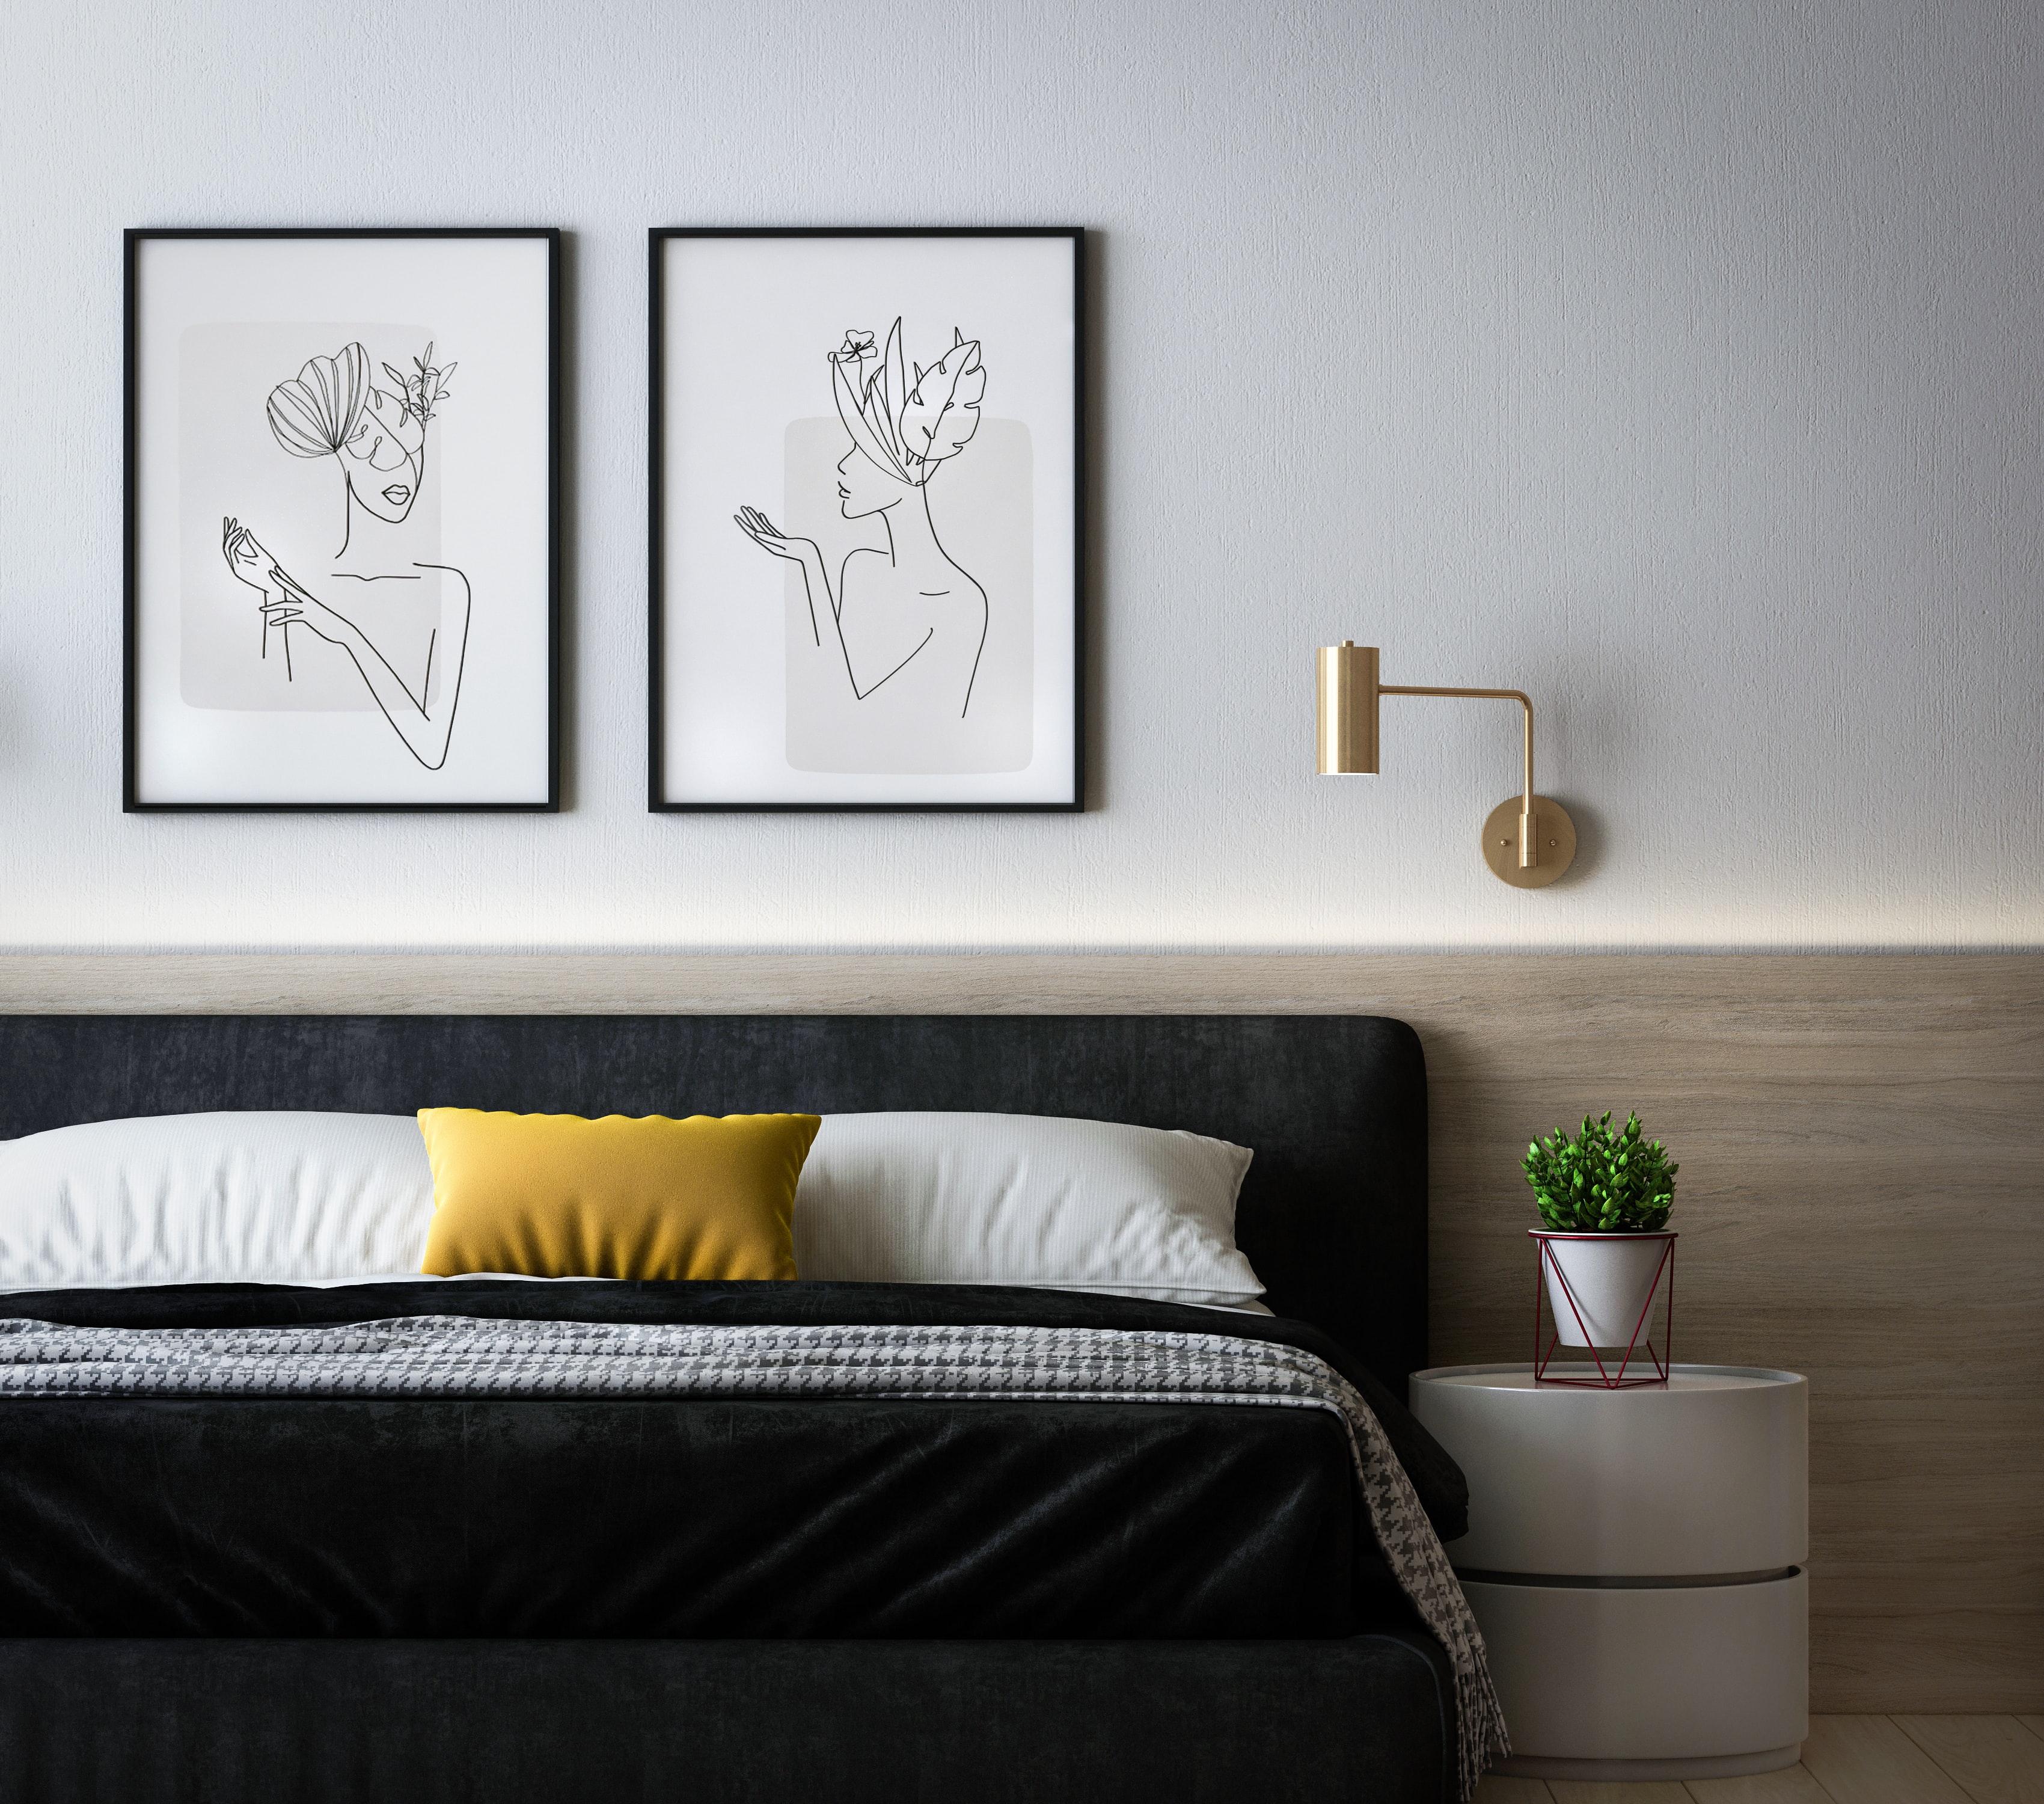 Two simple line drawings are framed above a bed.